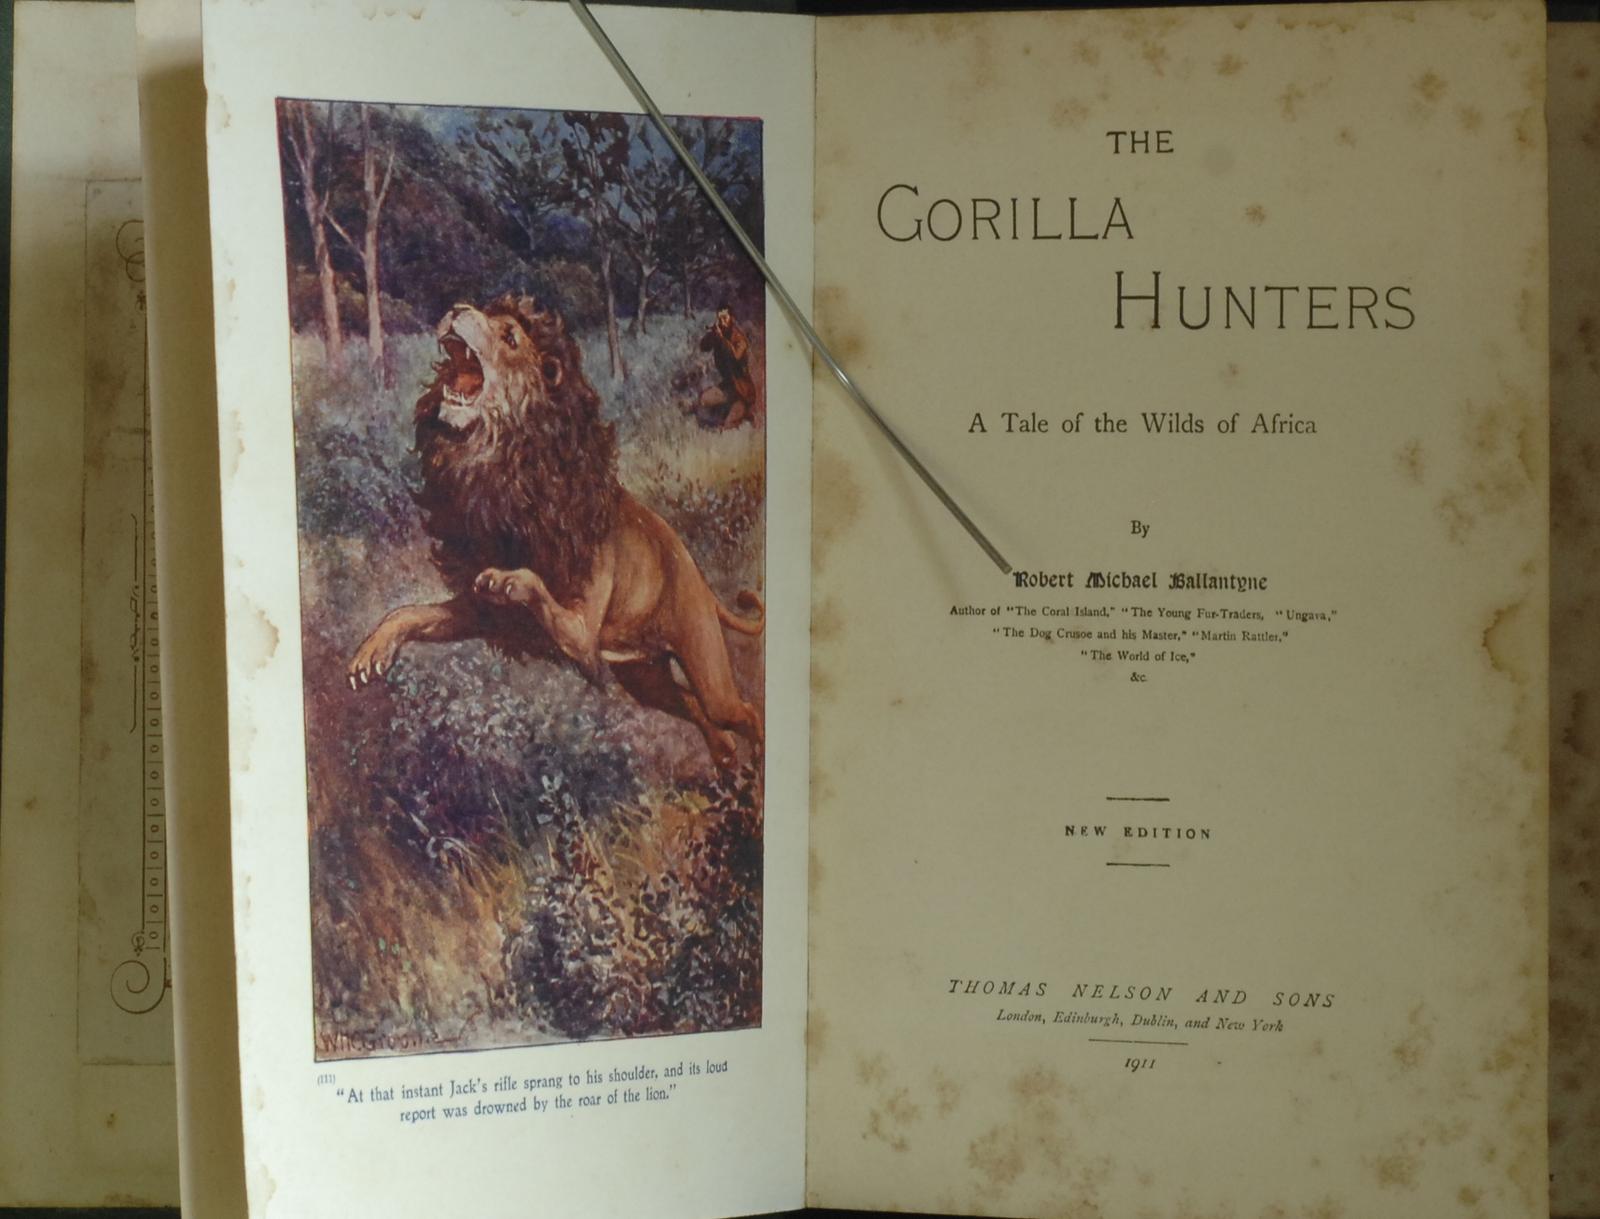 mbb006731d_-_Ballantyne_R_M_-_The_Gorilla_Hunters.A_Tale_Of_The_Wilds_Of_Africa_-_Contains_Illustrations.jpg